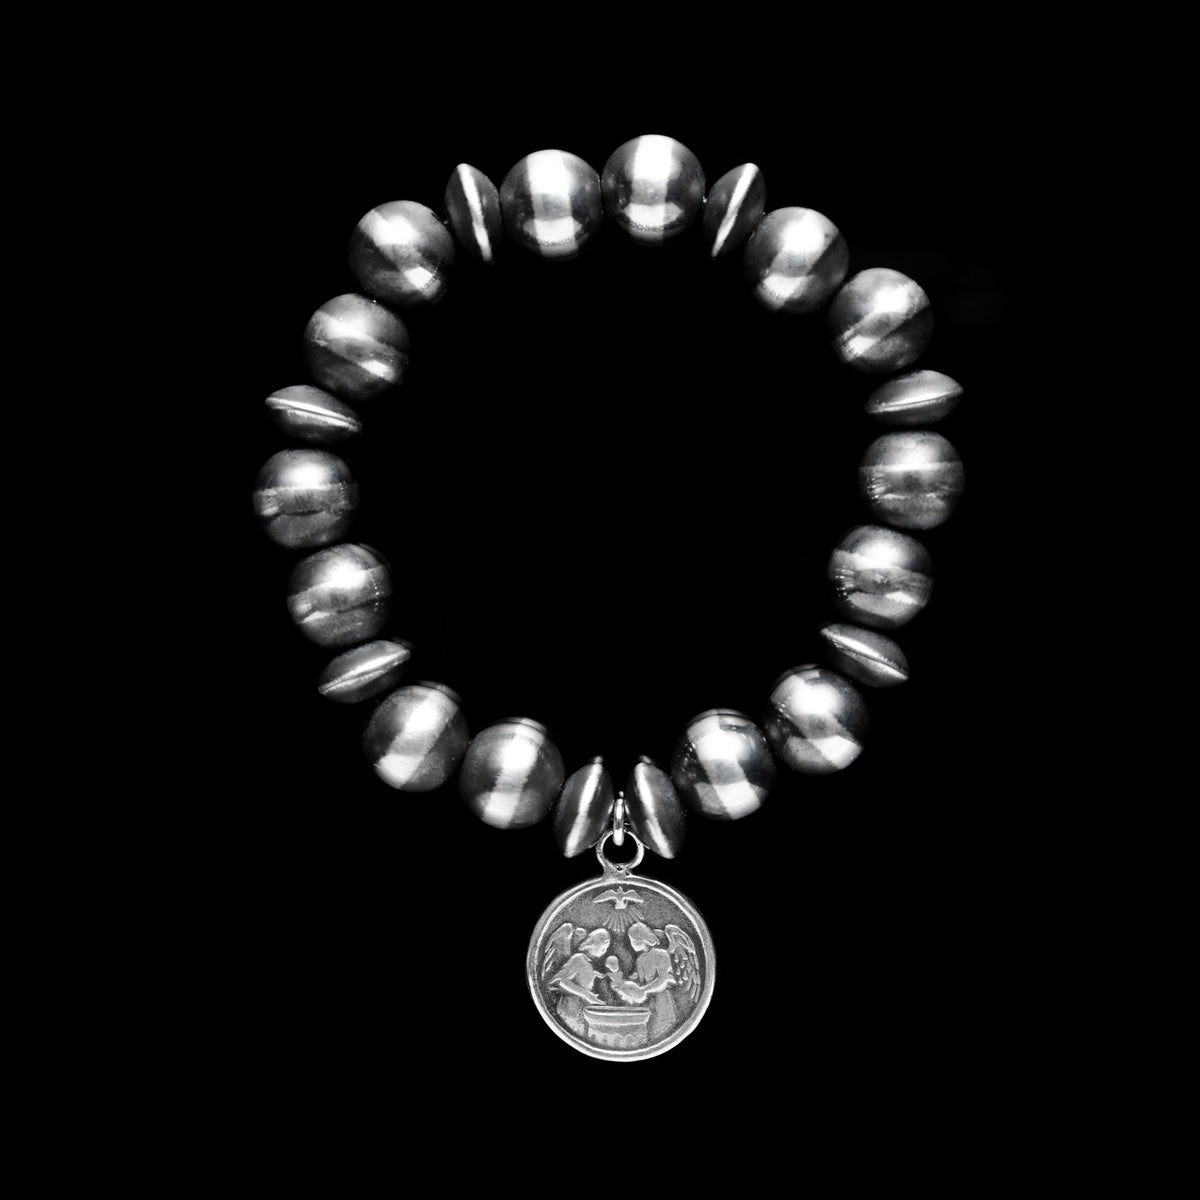 10mm Sterling Silver Stretch Bracelet with Angel Pendant